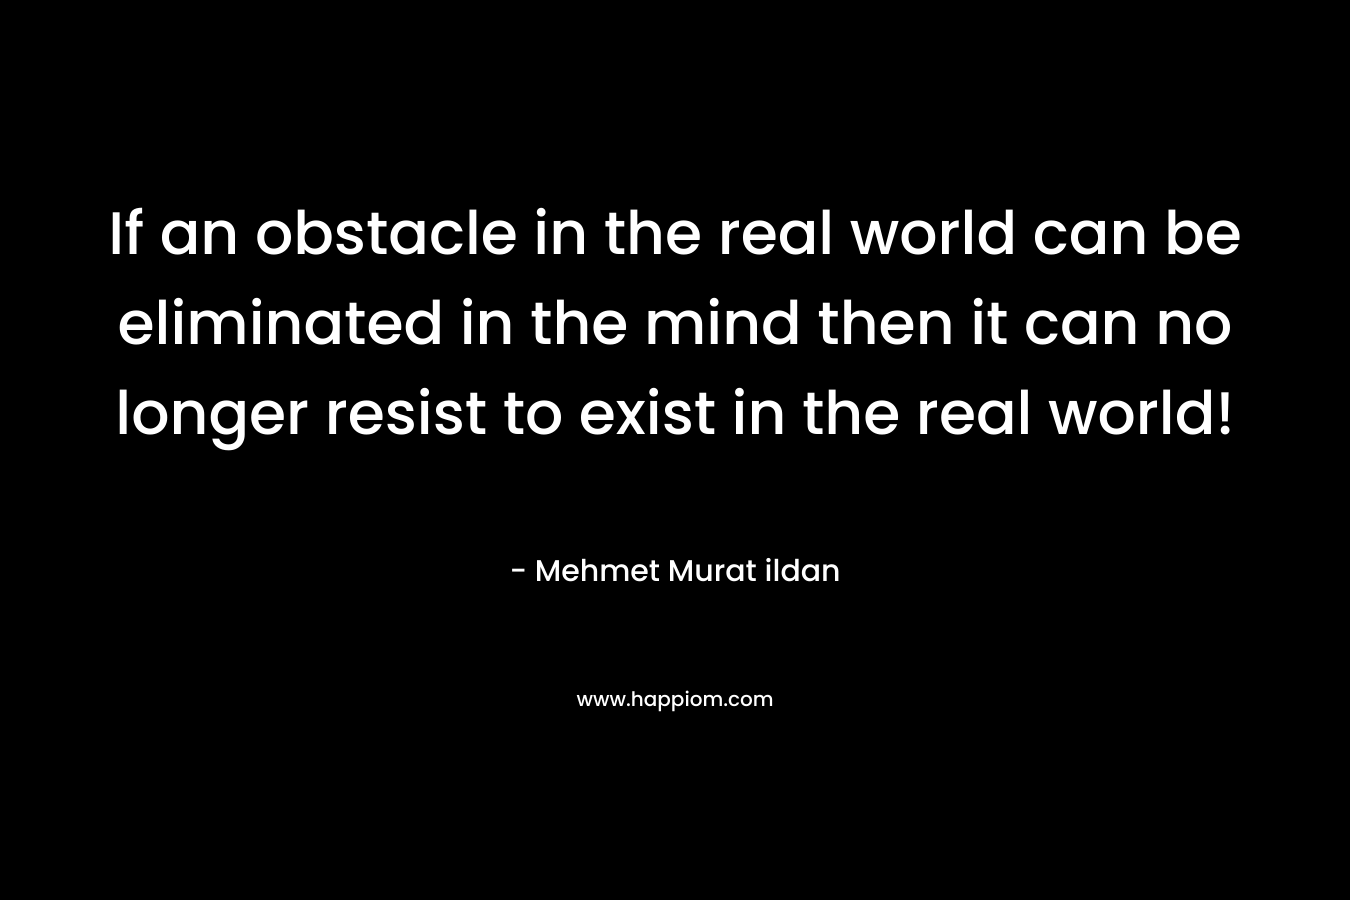 If an obstacle in the real world can be eliminated in the mind then it can no longer resist to exist in the real world!